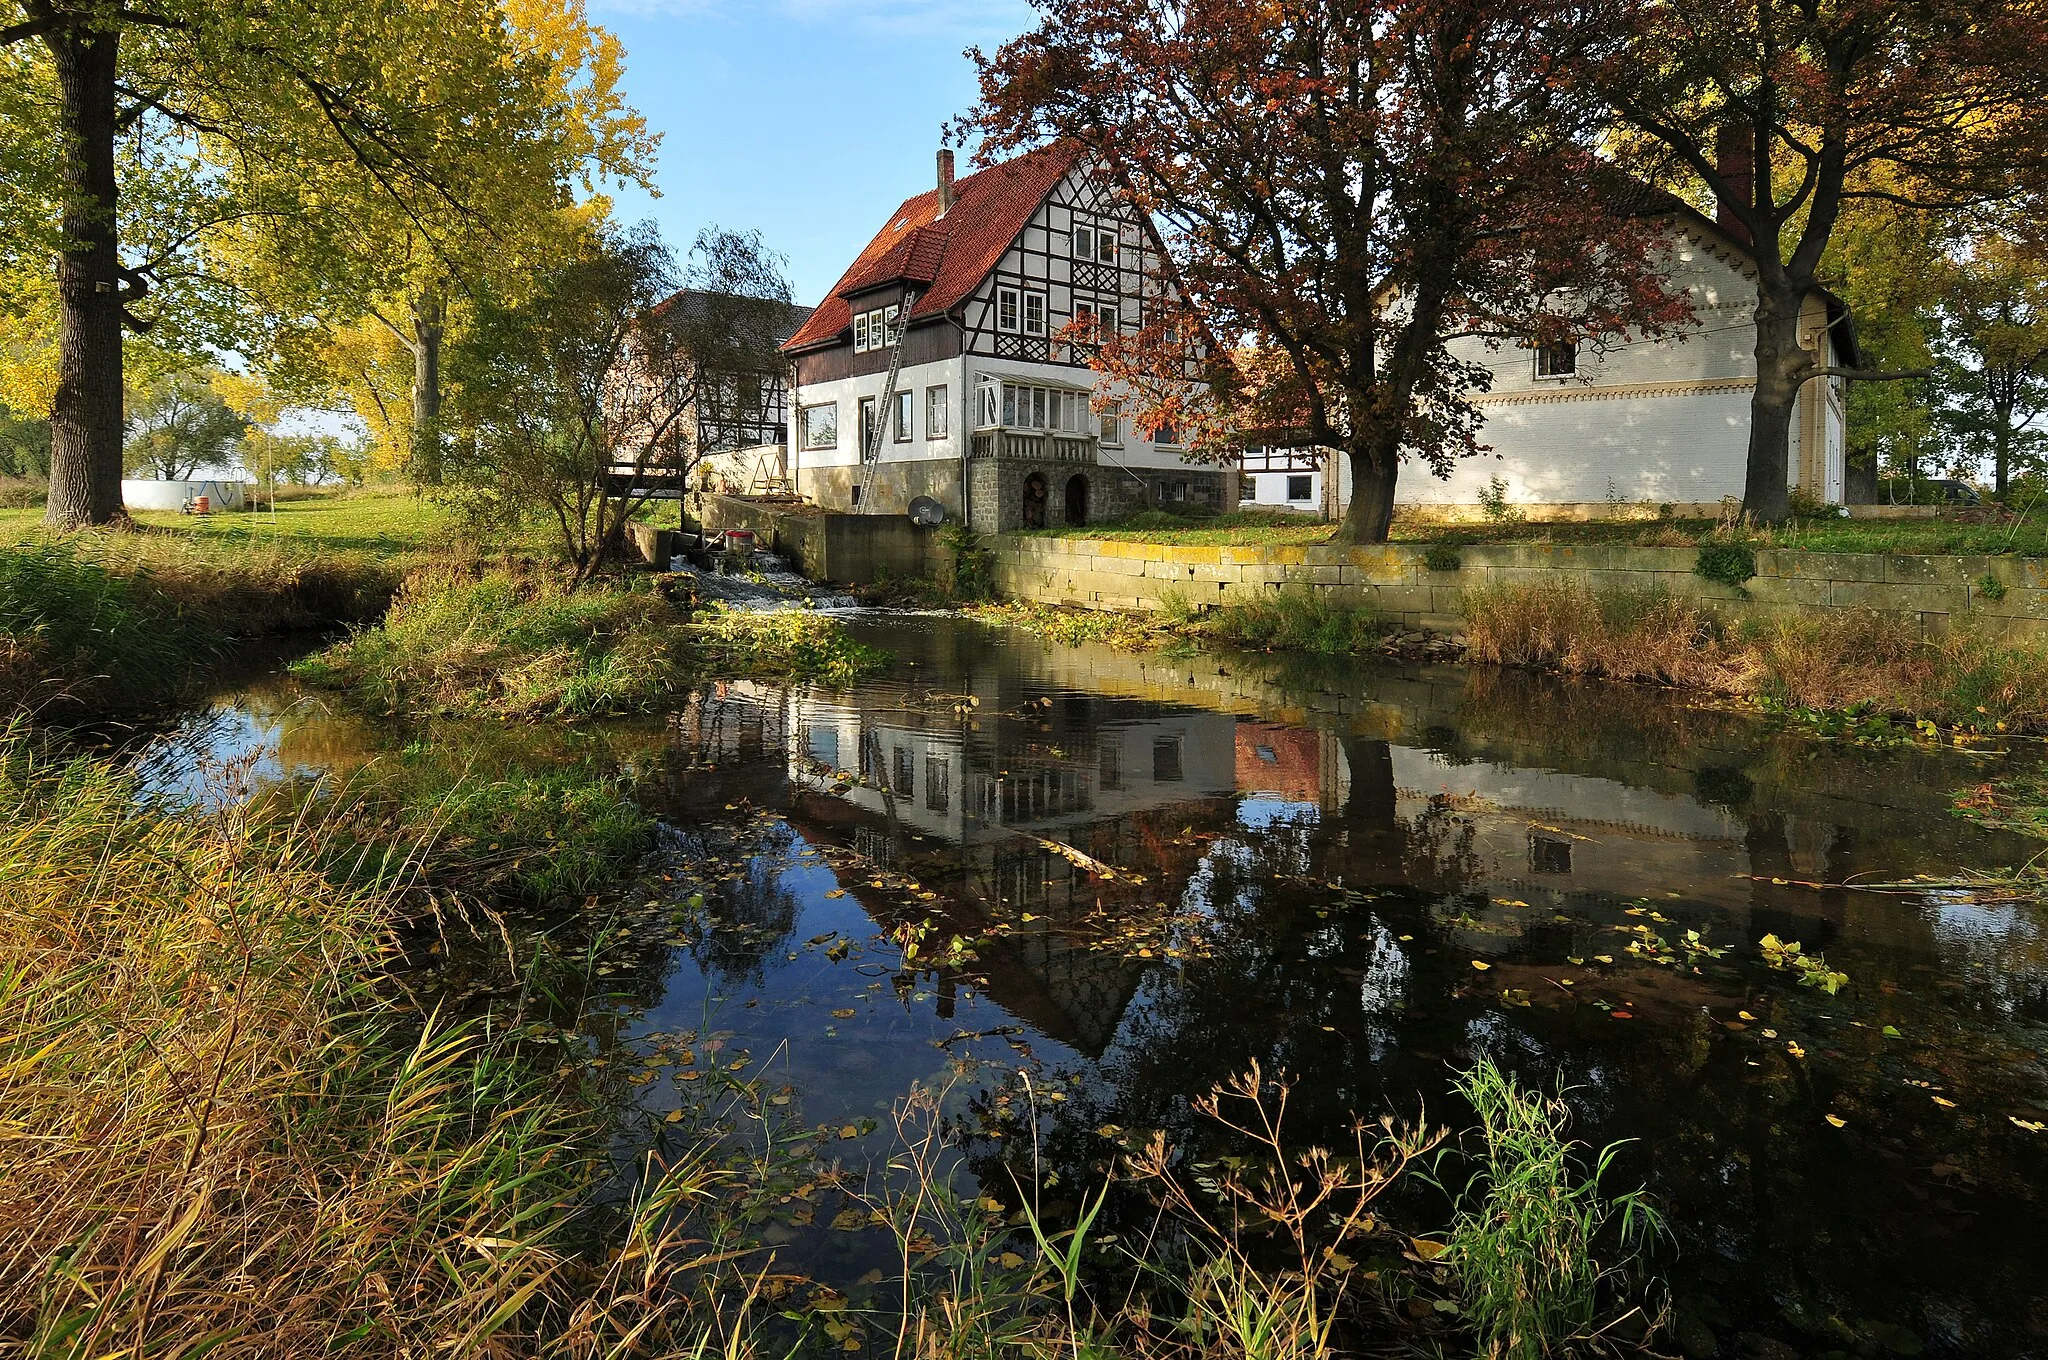 Photo showing: The "Rosenmühle" on the river Haller is a former water mill in Adensen, Nordstemmen, Lower Saxony, Germany.